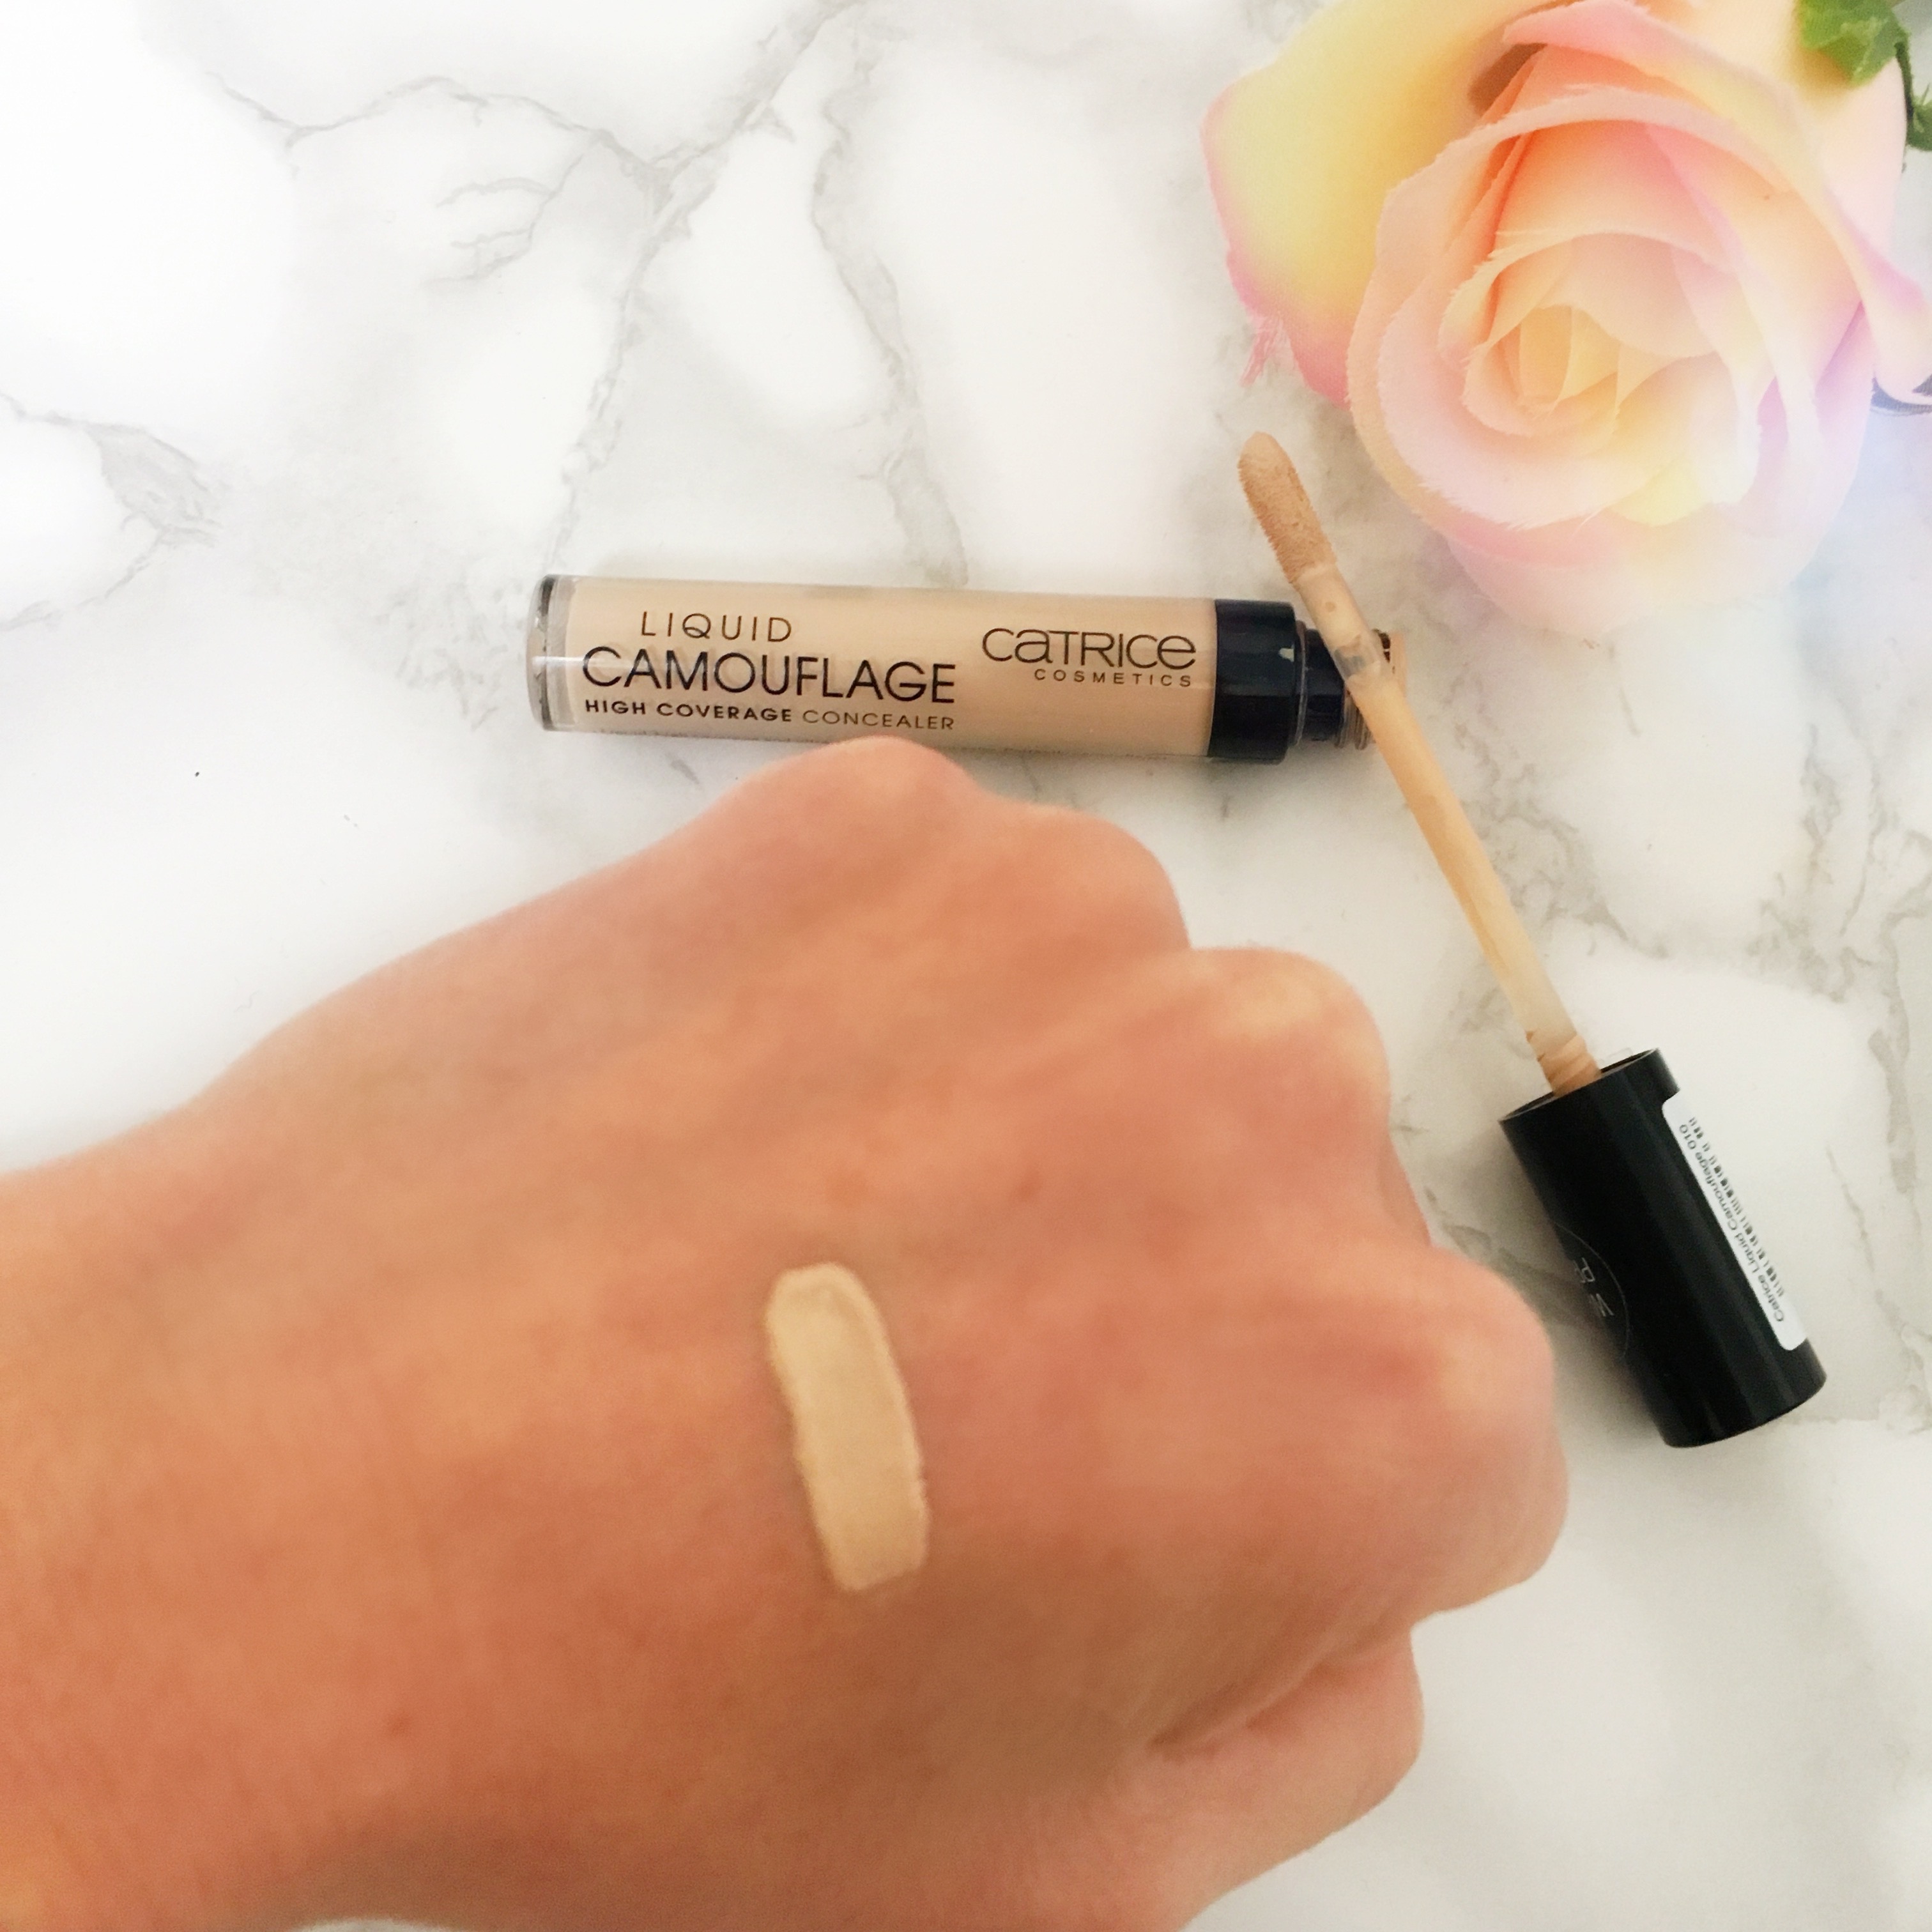 The Cruelty Free Liquid Camouflage Concealer from Catrice - Columns by Kari